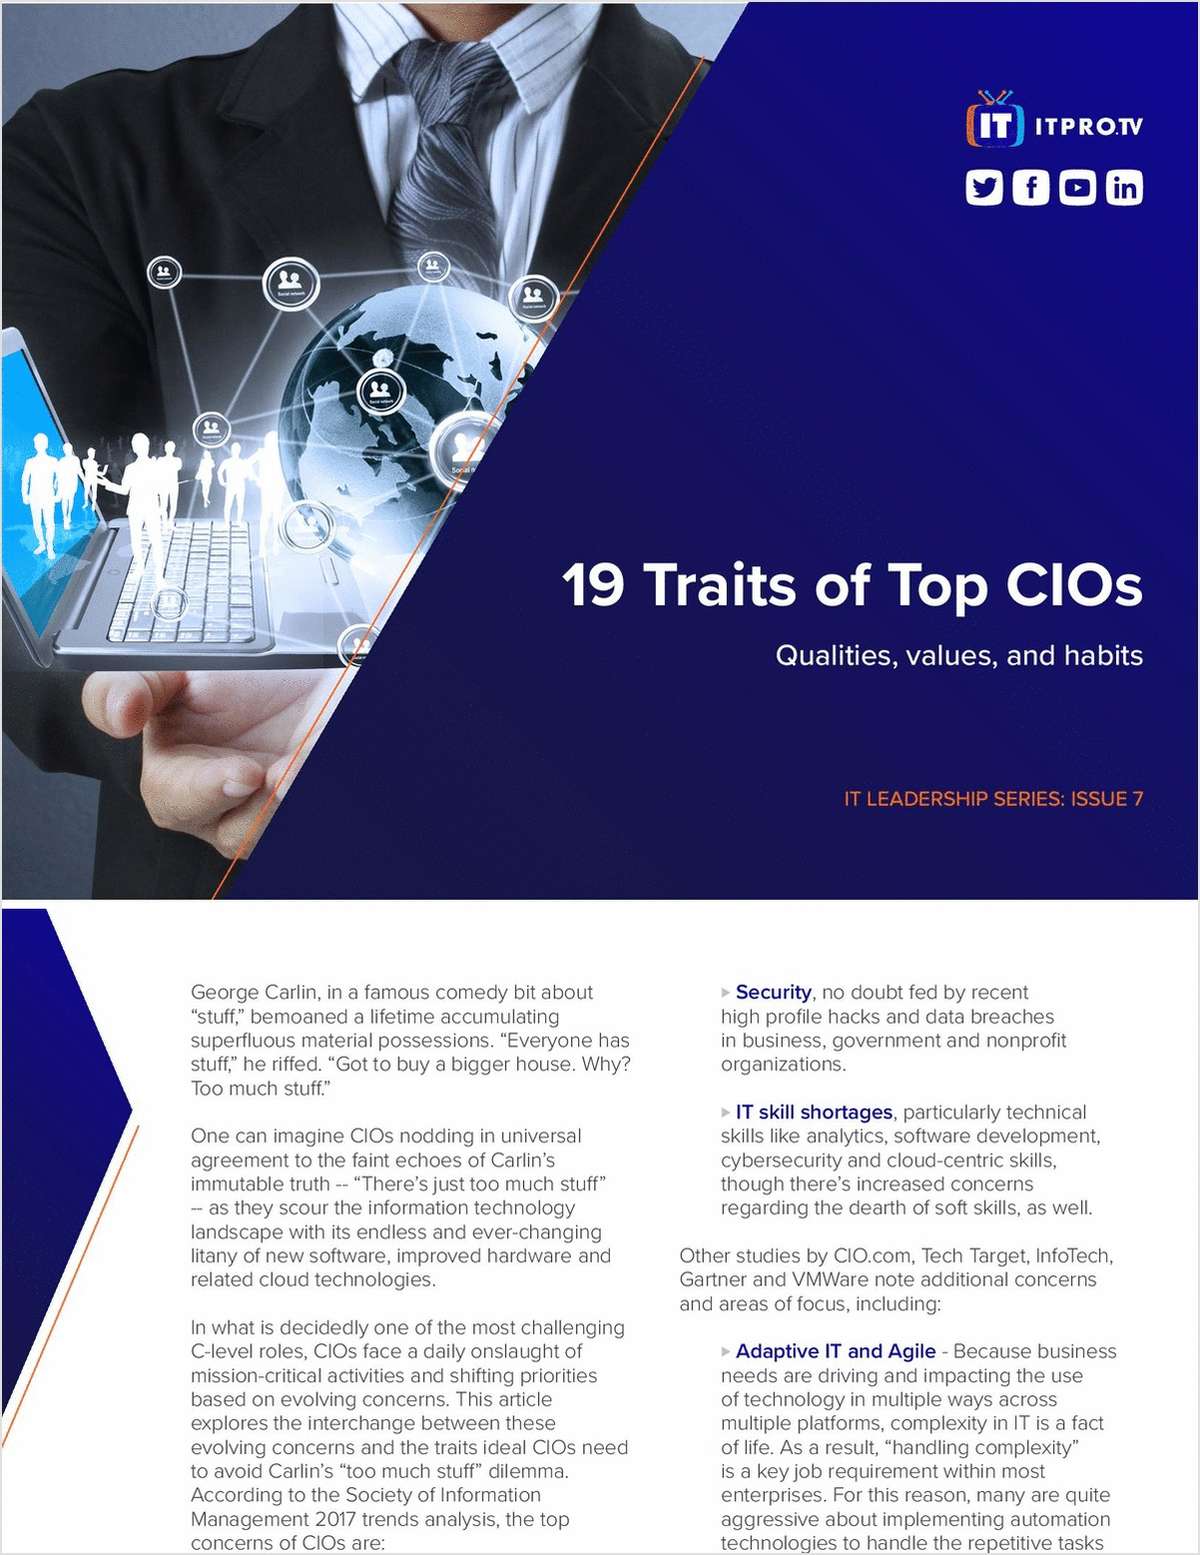 19 Traits of Top CIOs: Qualities, Values, and Habits